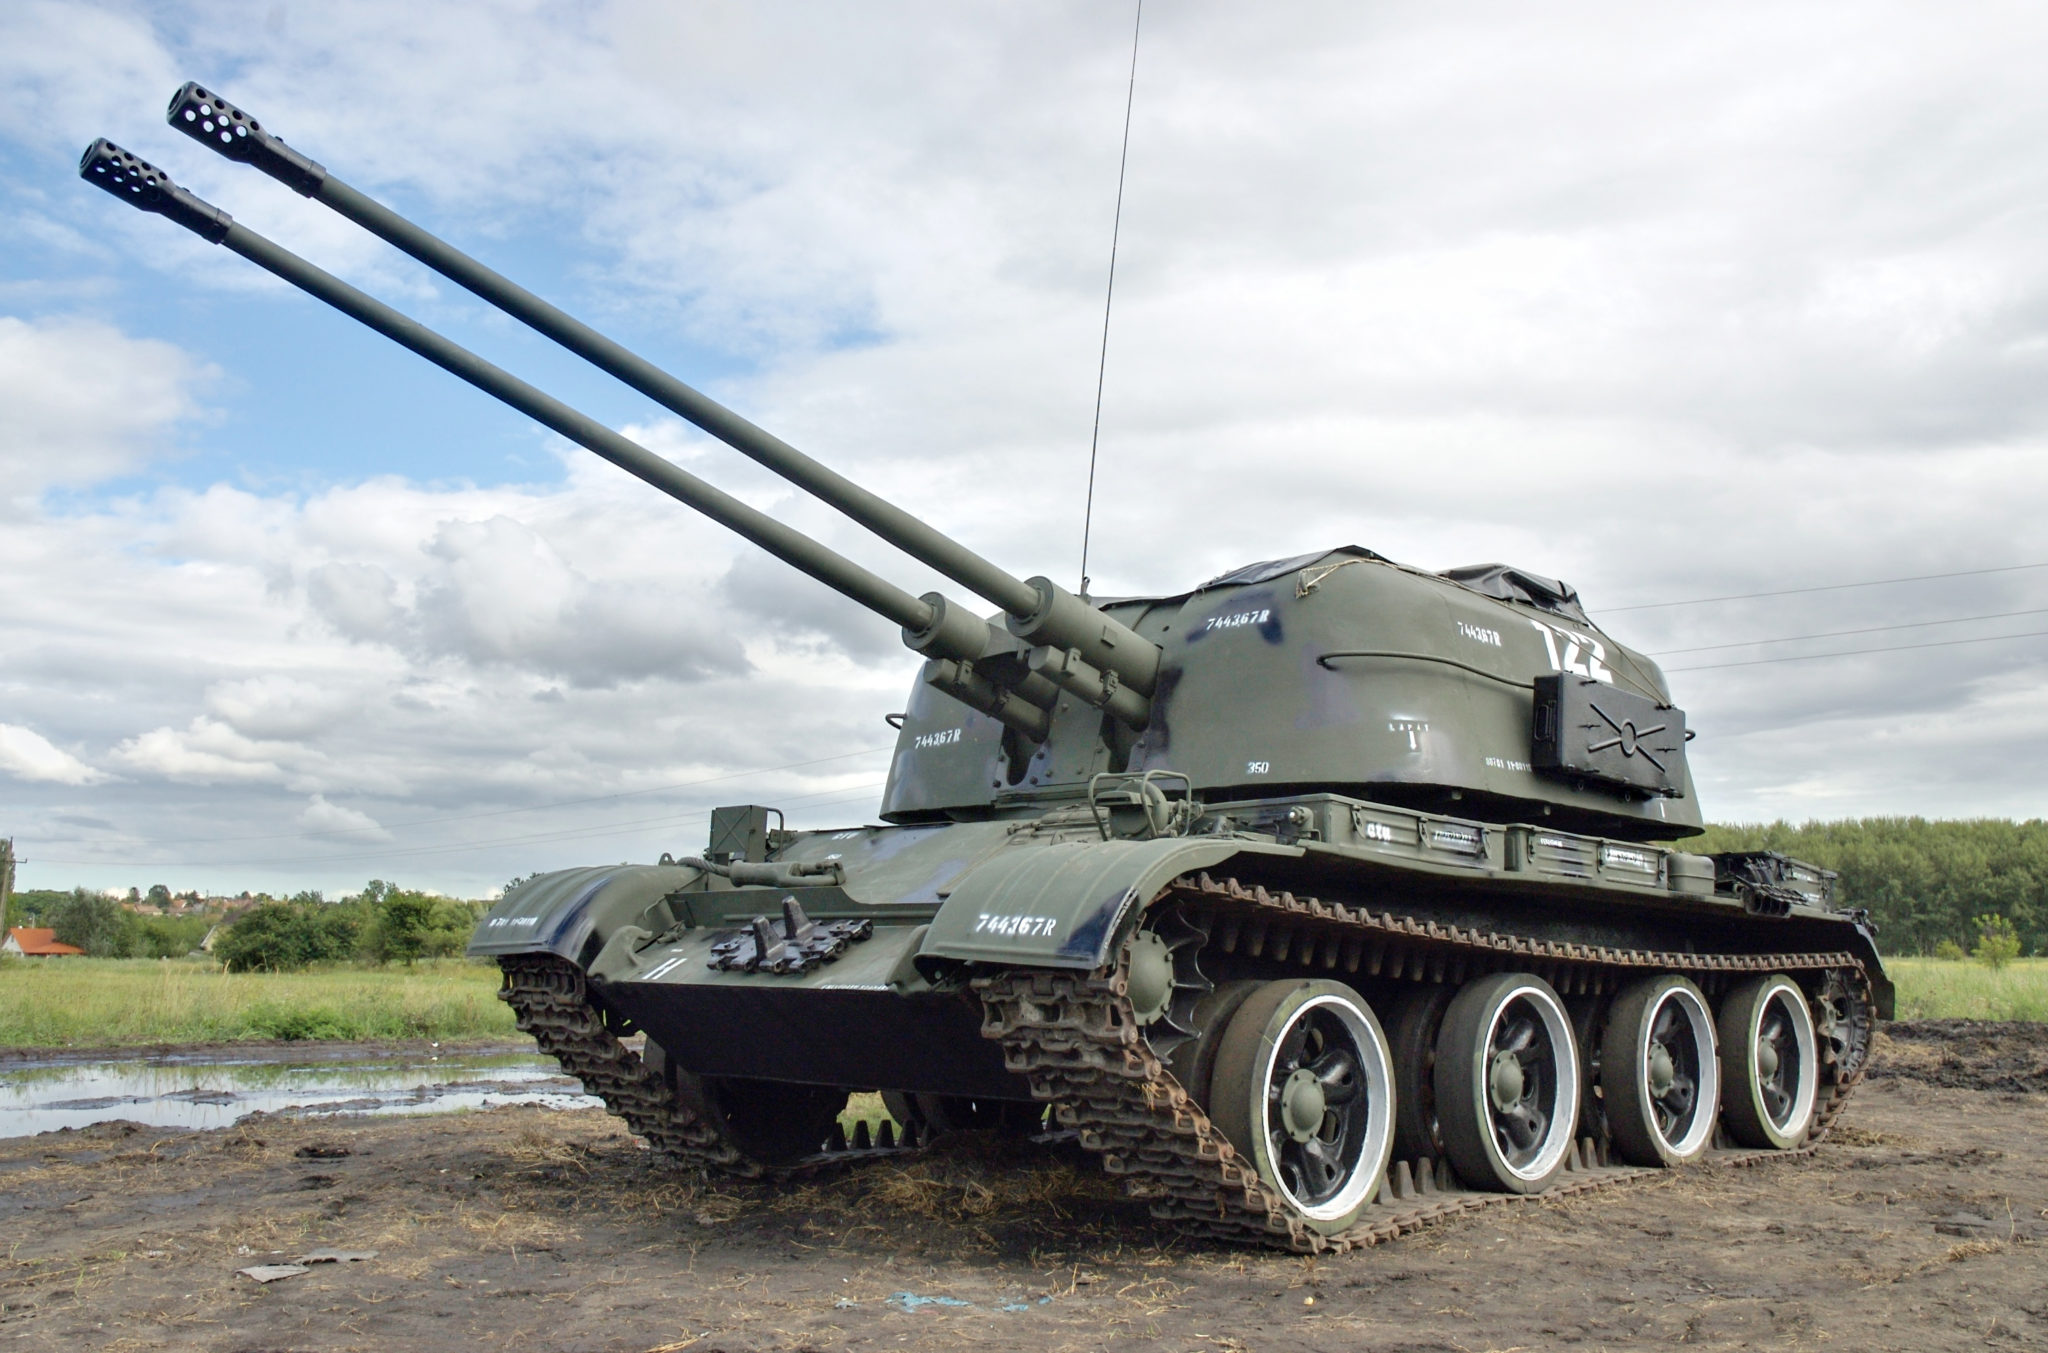 This pint-sized German tank-killer packs a punch